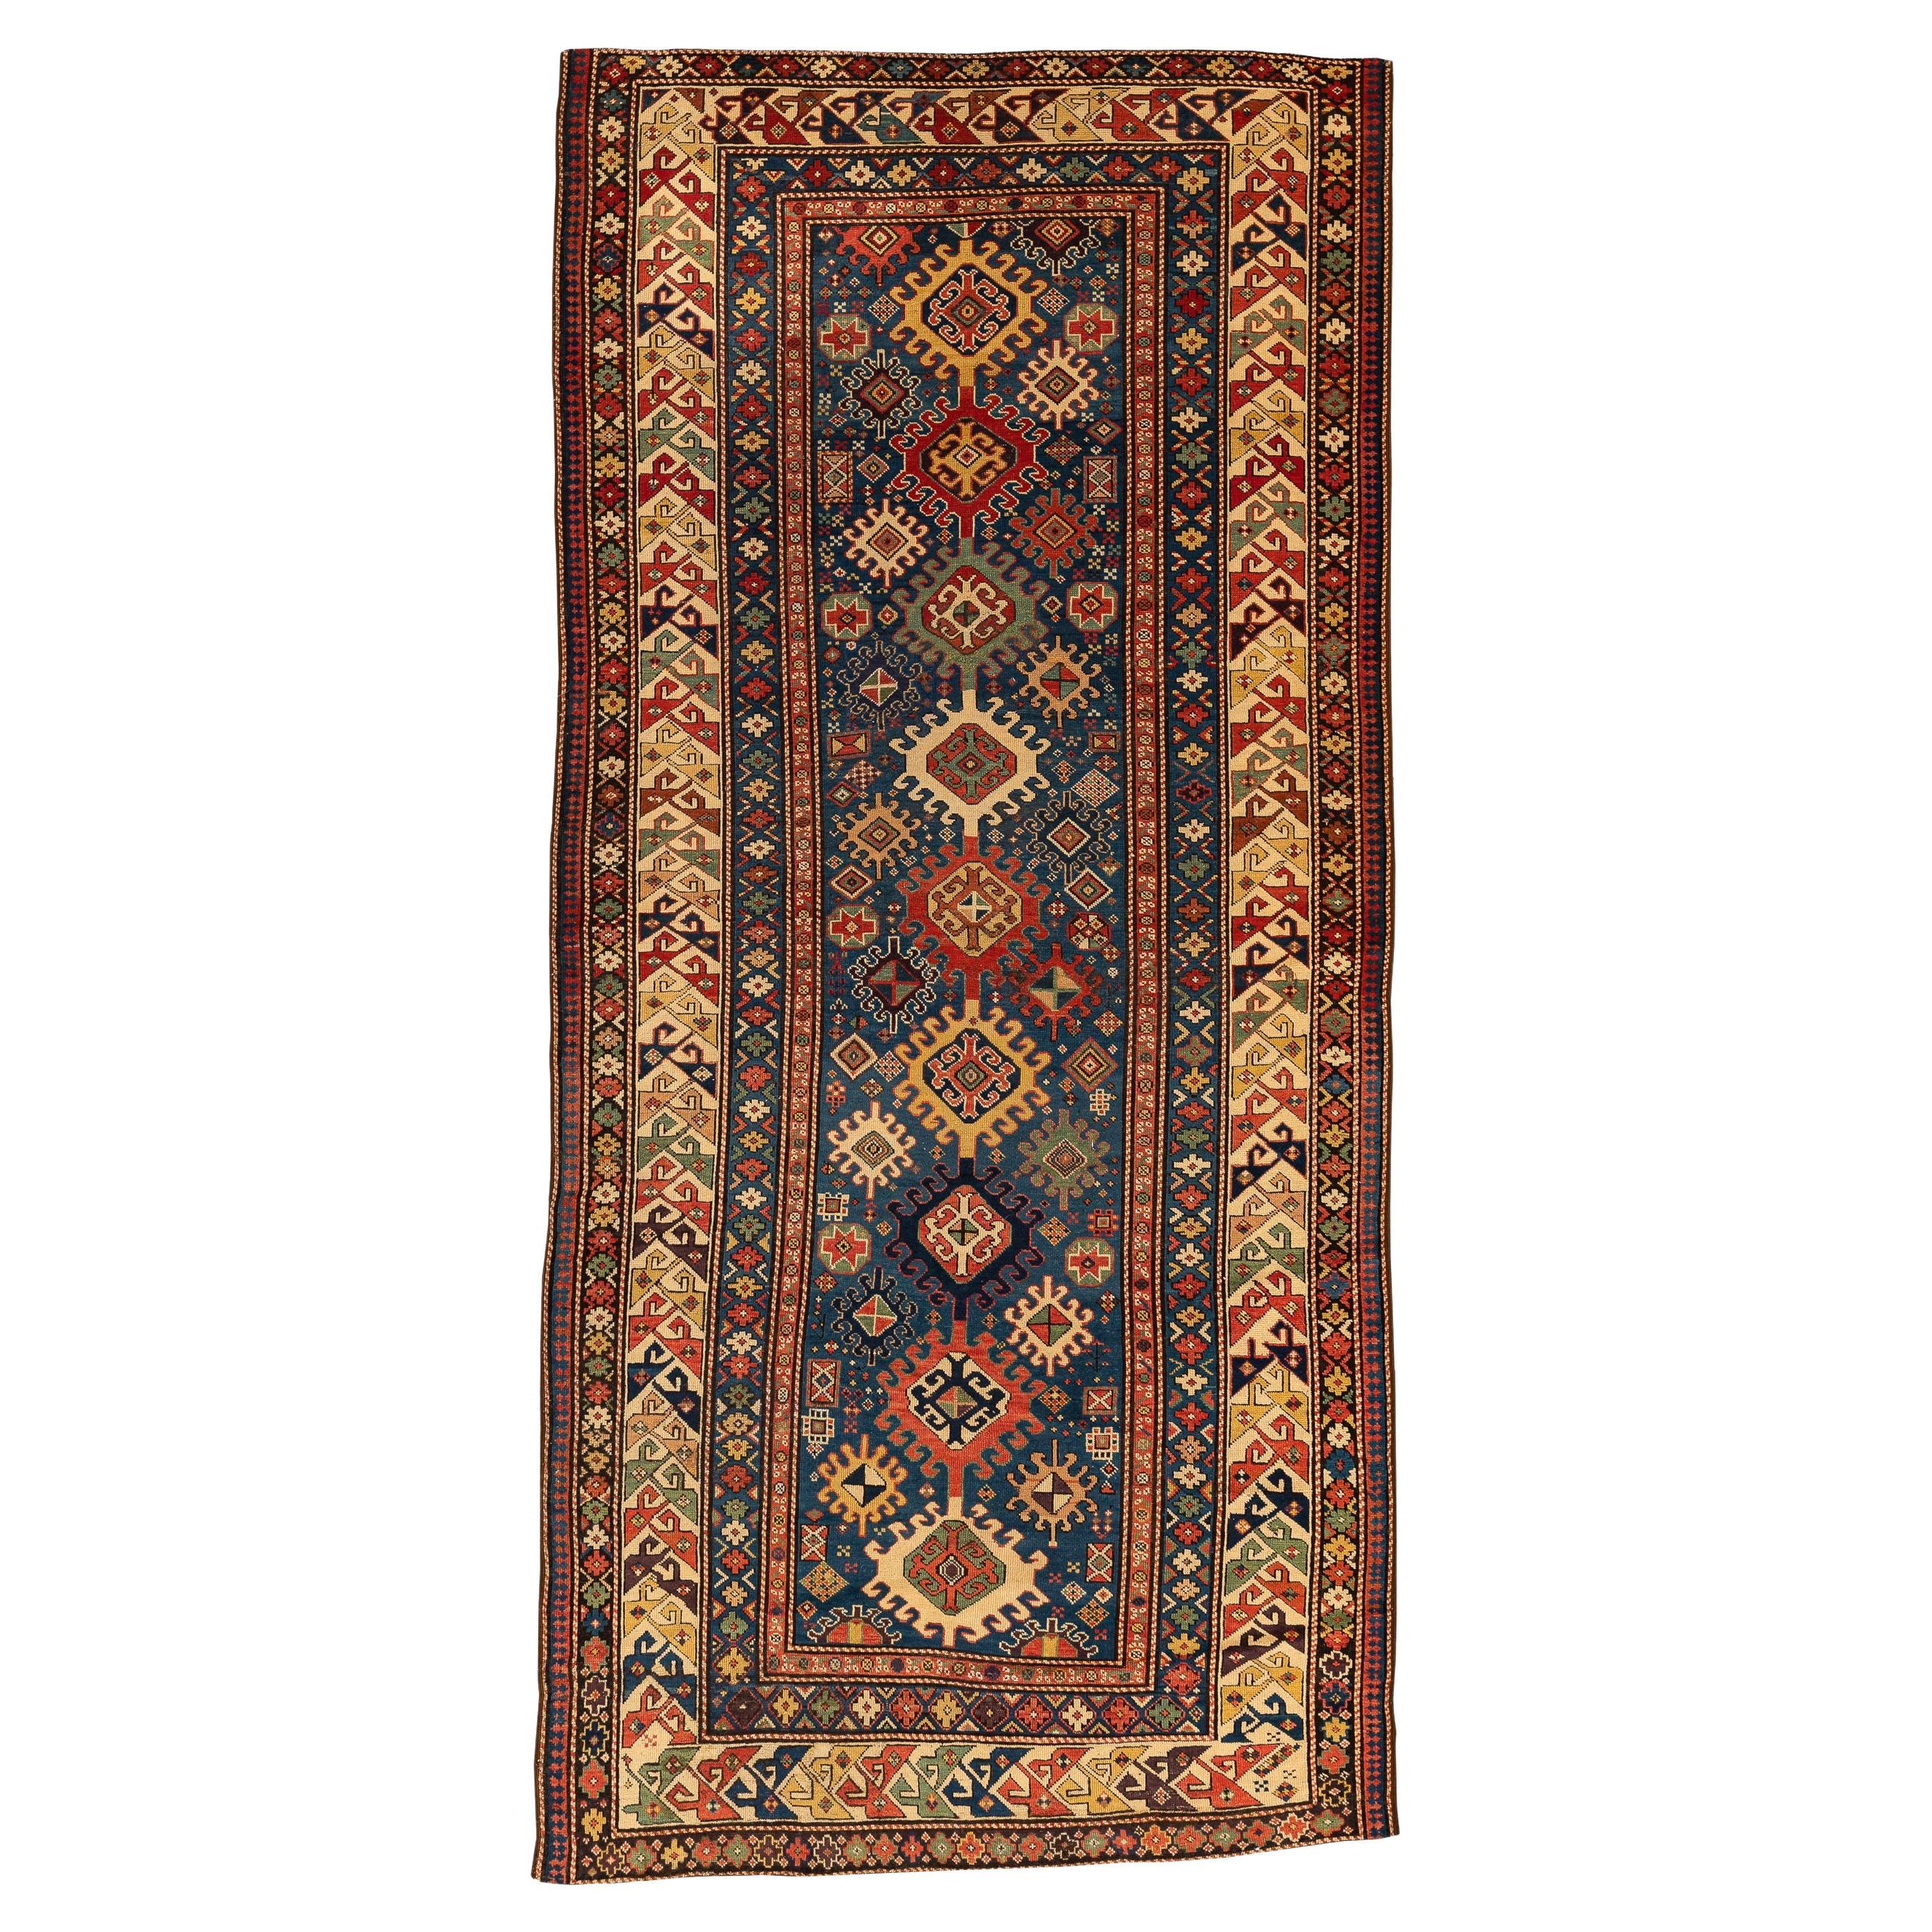 Kazak – Central Caucasus

Classic Kazak rug with ten serrated diamond-shaped medallions lined up in the centre of the blue field. Surrounding the more oversized medallions, small serrated medallions, lozenges, flowers, bushes, and other geometric